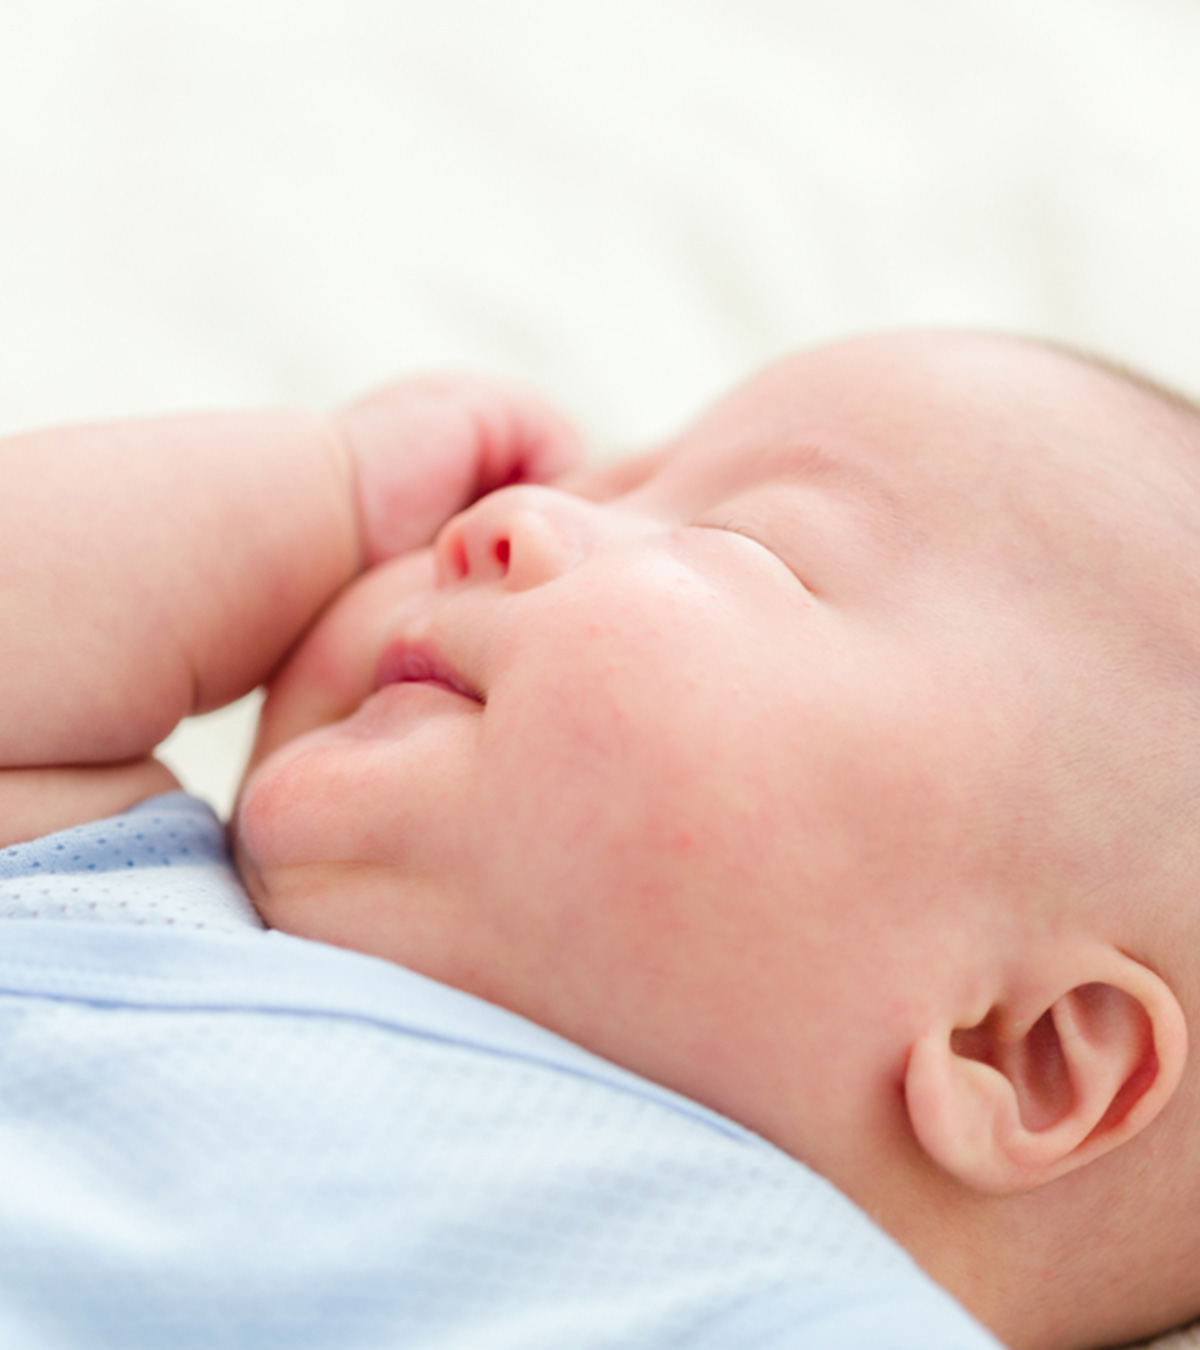 Baby Scratching Face: Why Does It Happen And How To Prevent It